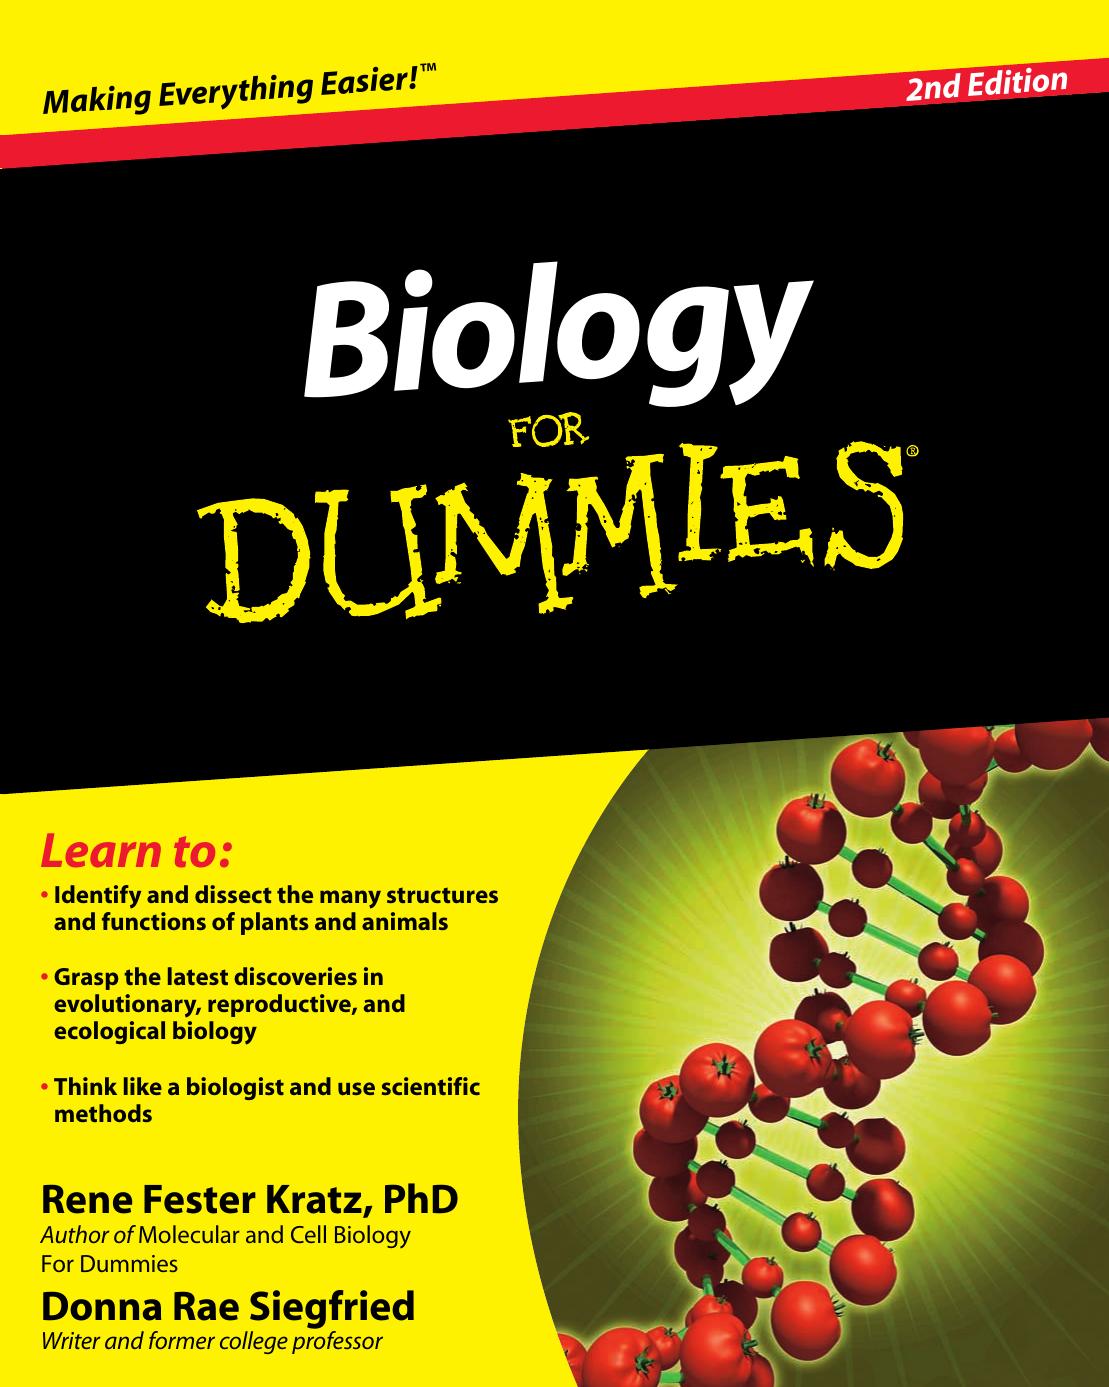 Biology For Dummies, 2nd Edition